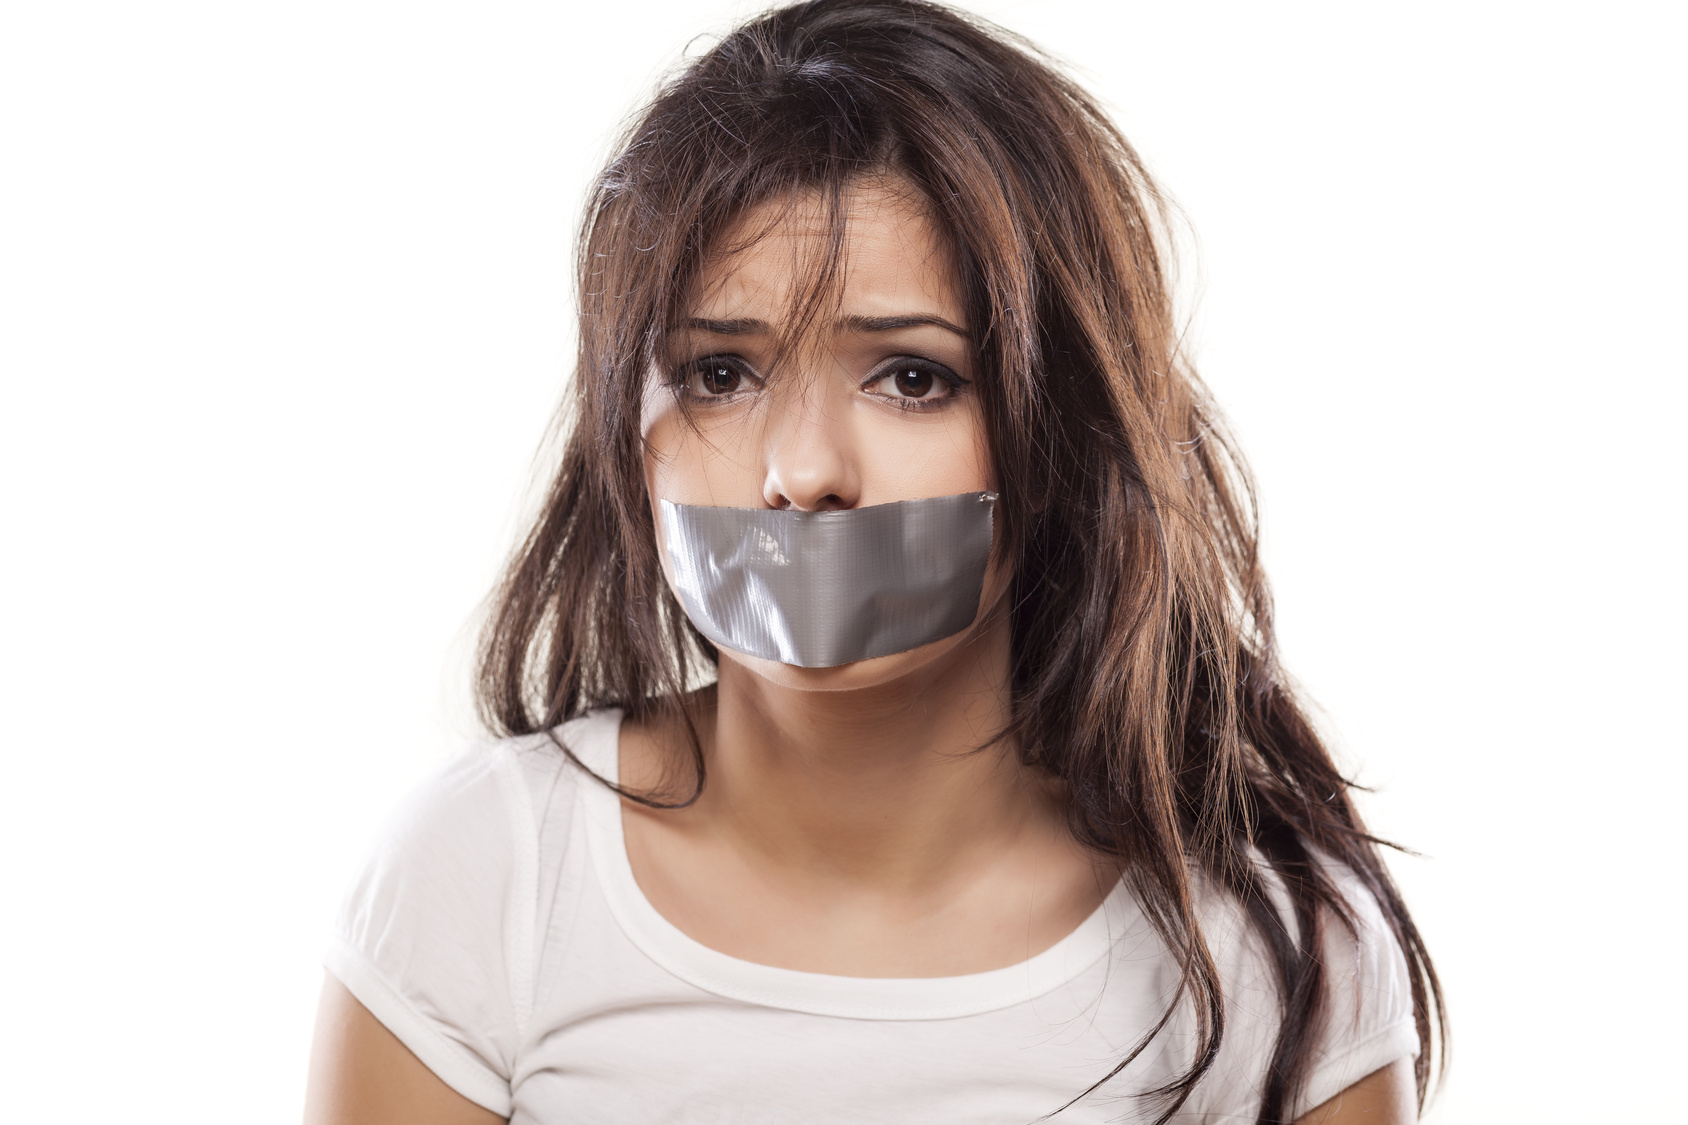 Duct tape gagged photos